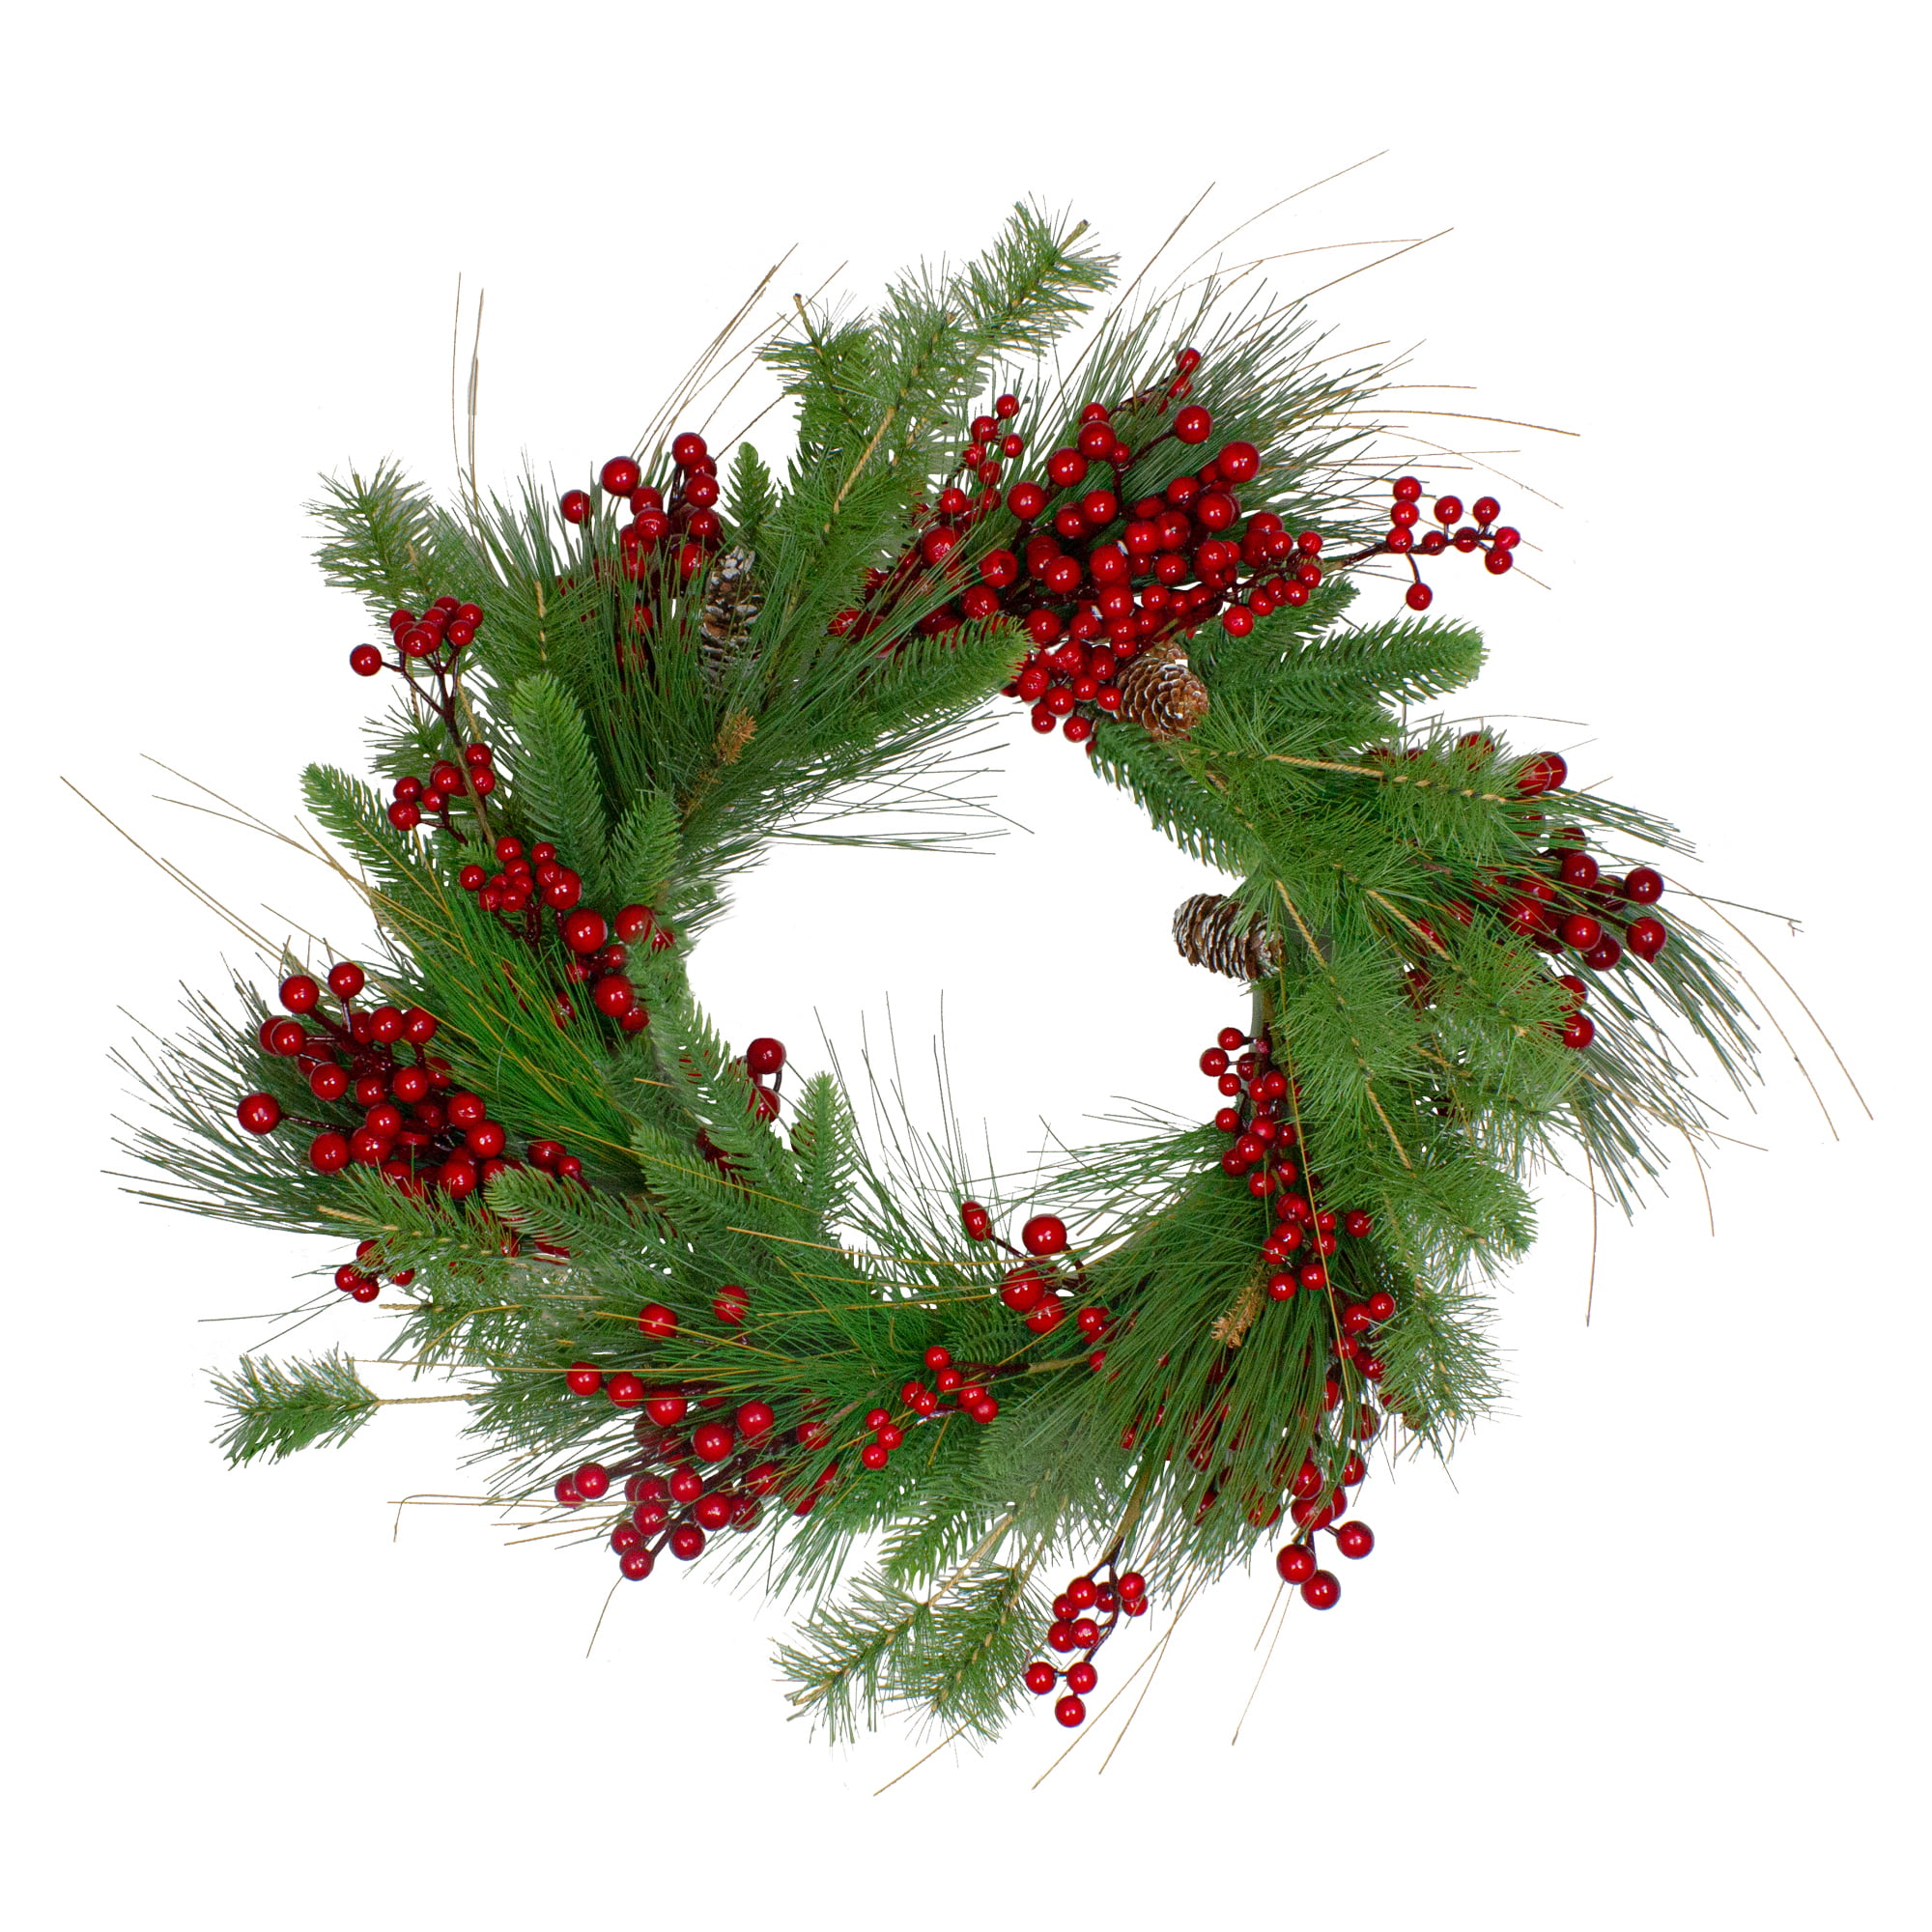 Artificial 24" red berry green leaves Leaf wreath 24 inch for Christmas decor A 